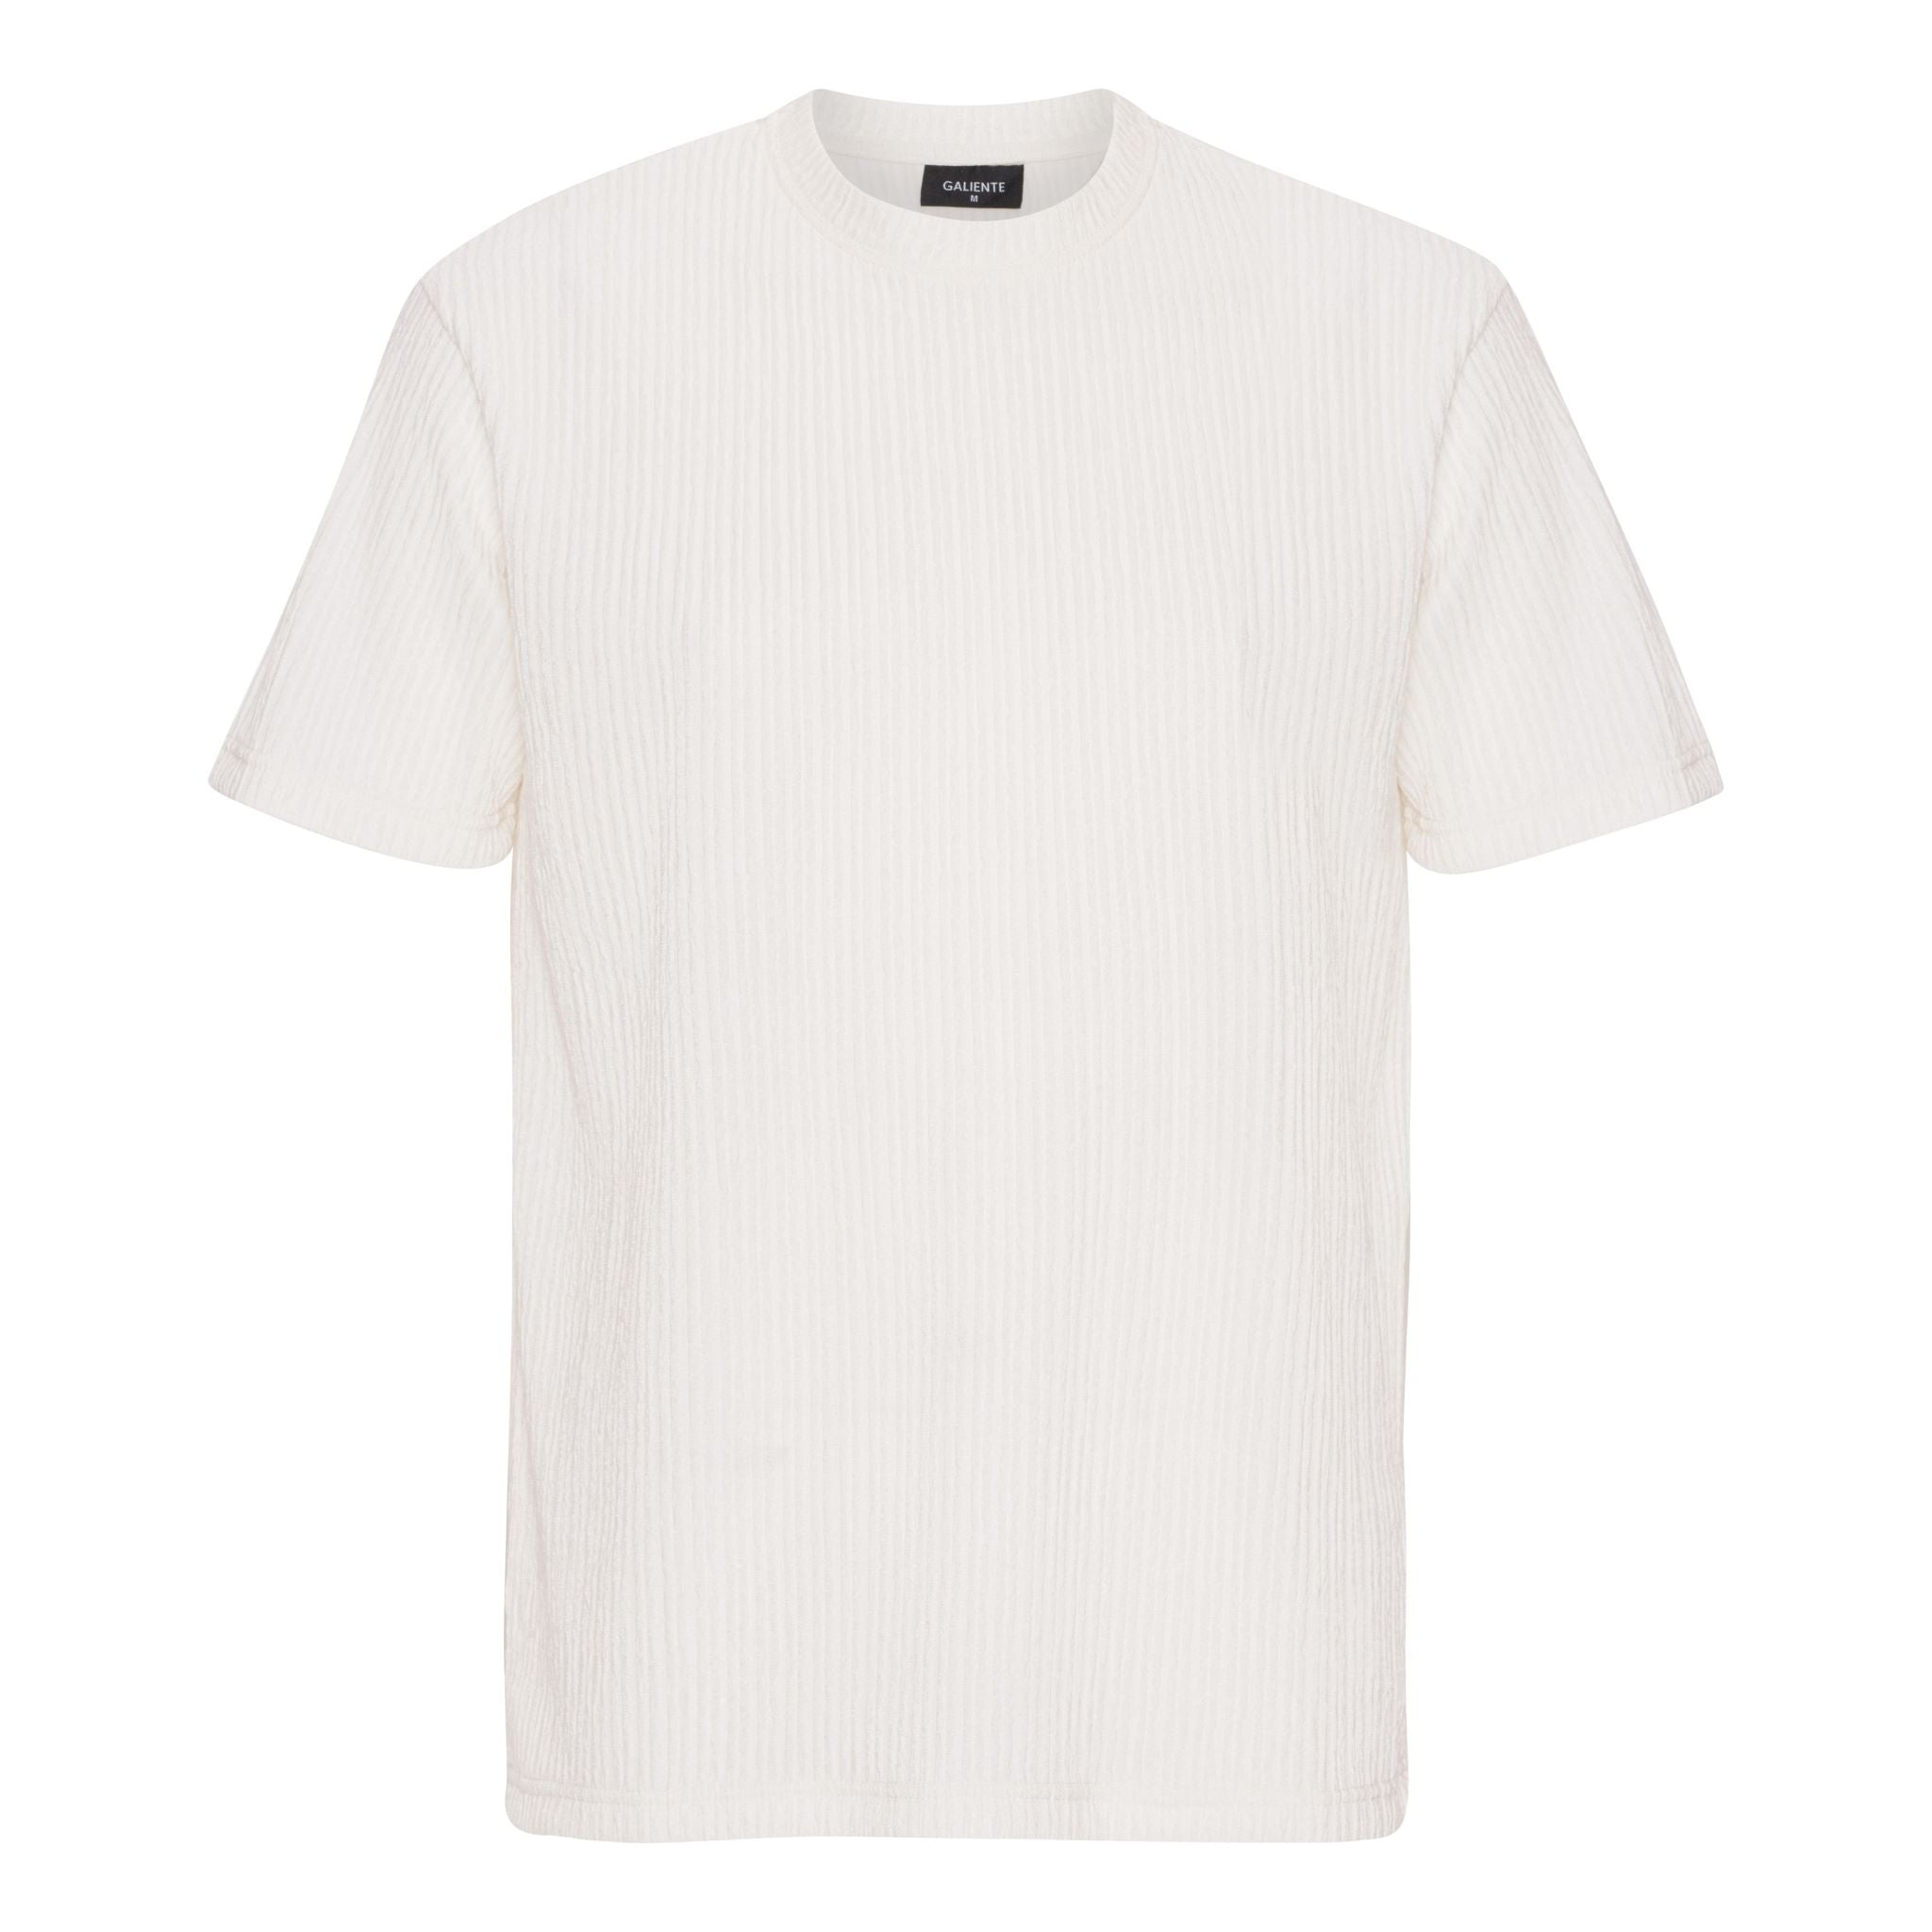 Offwhite crepe T-shirt